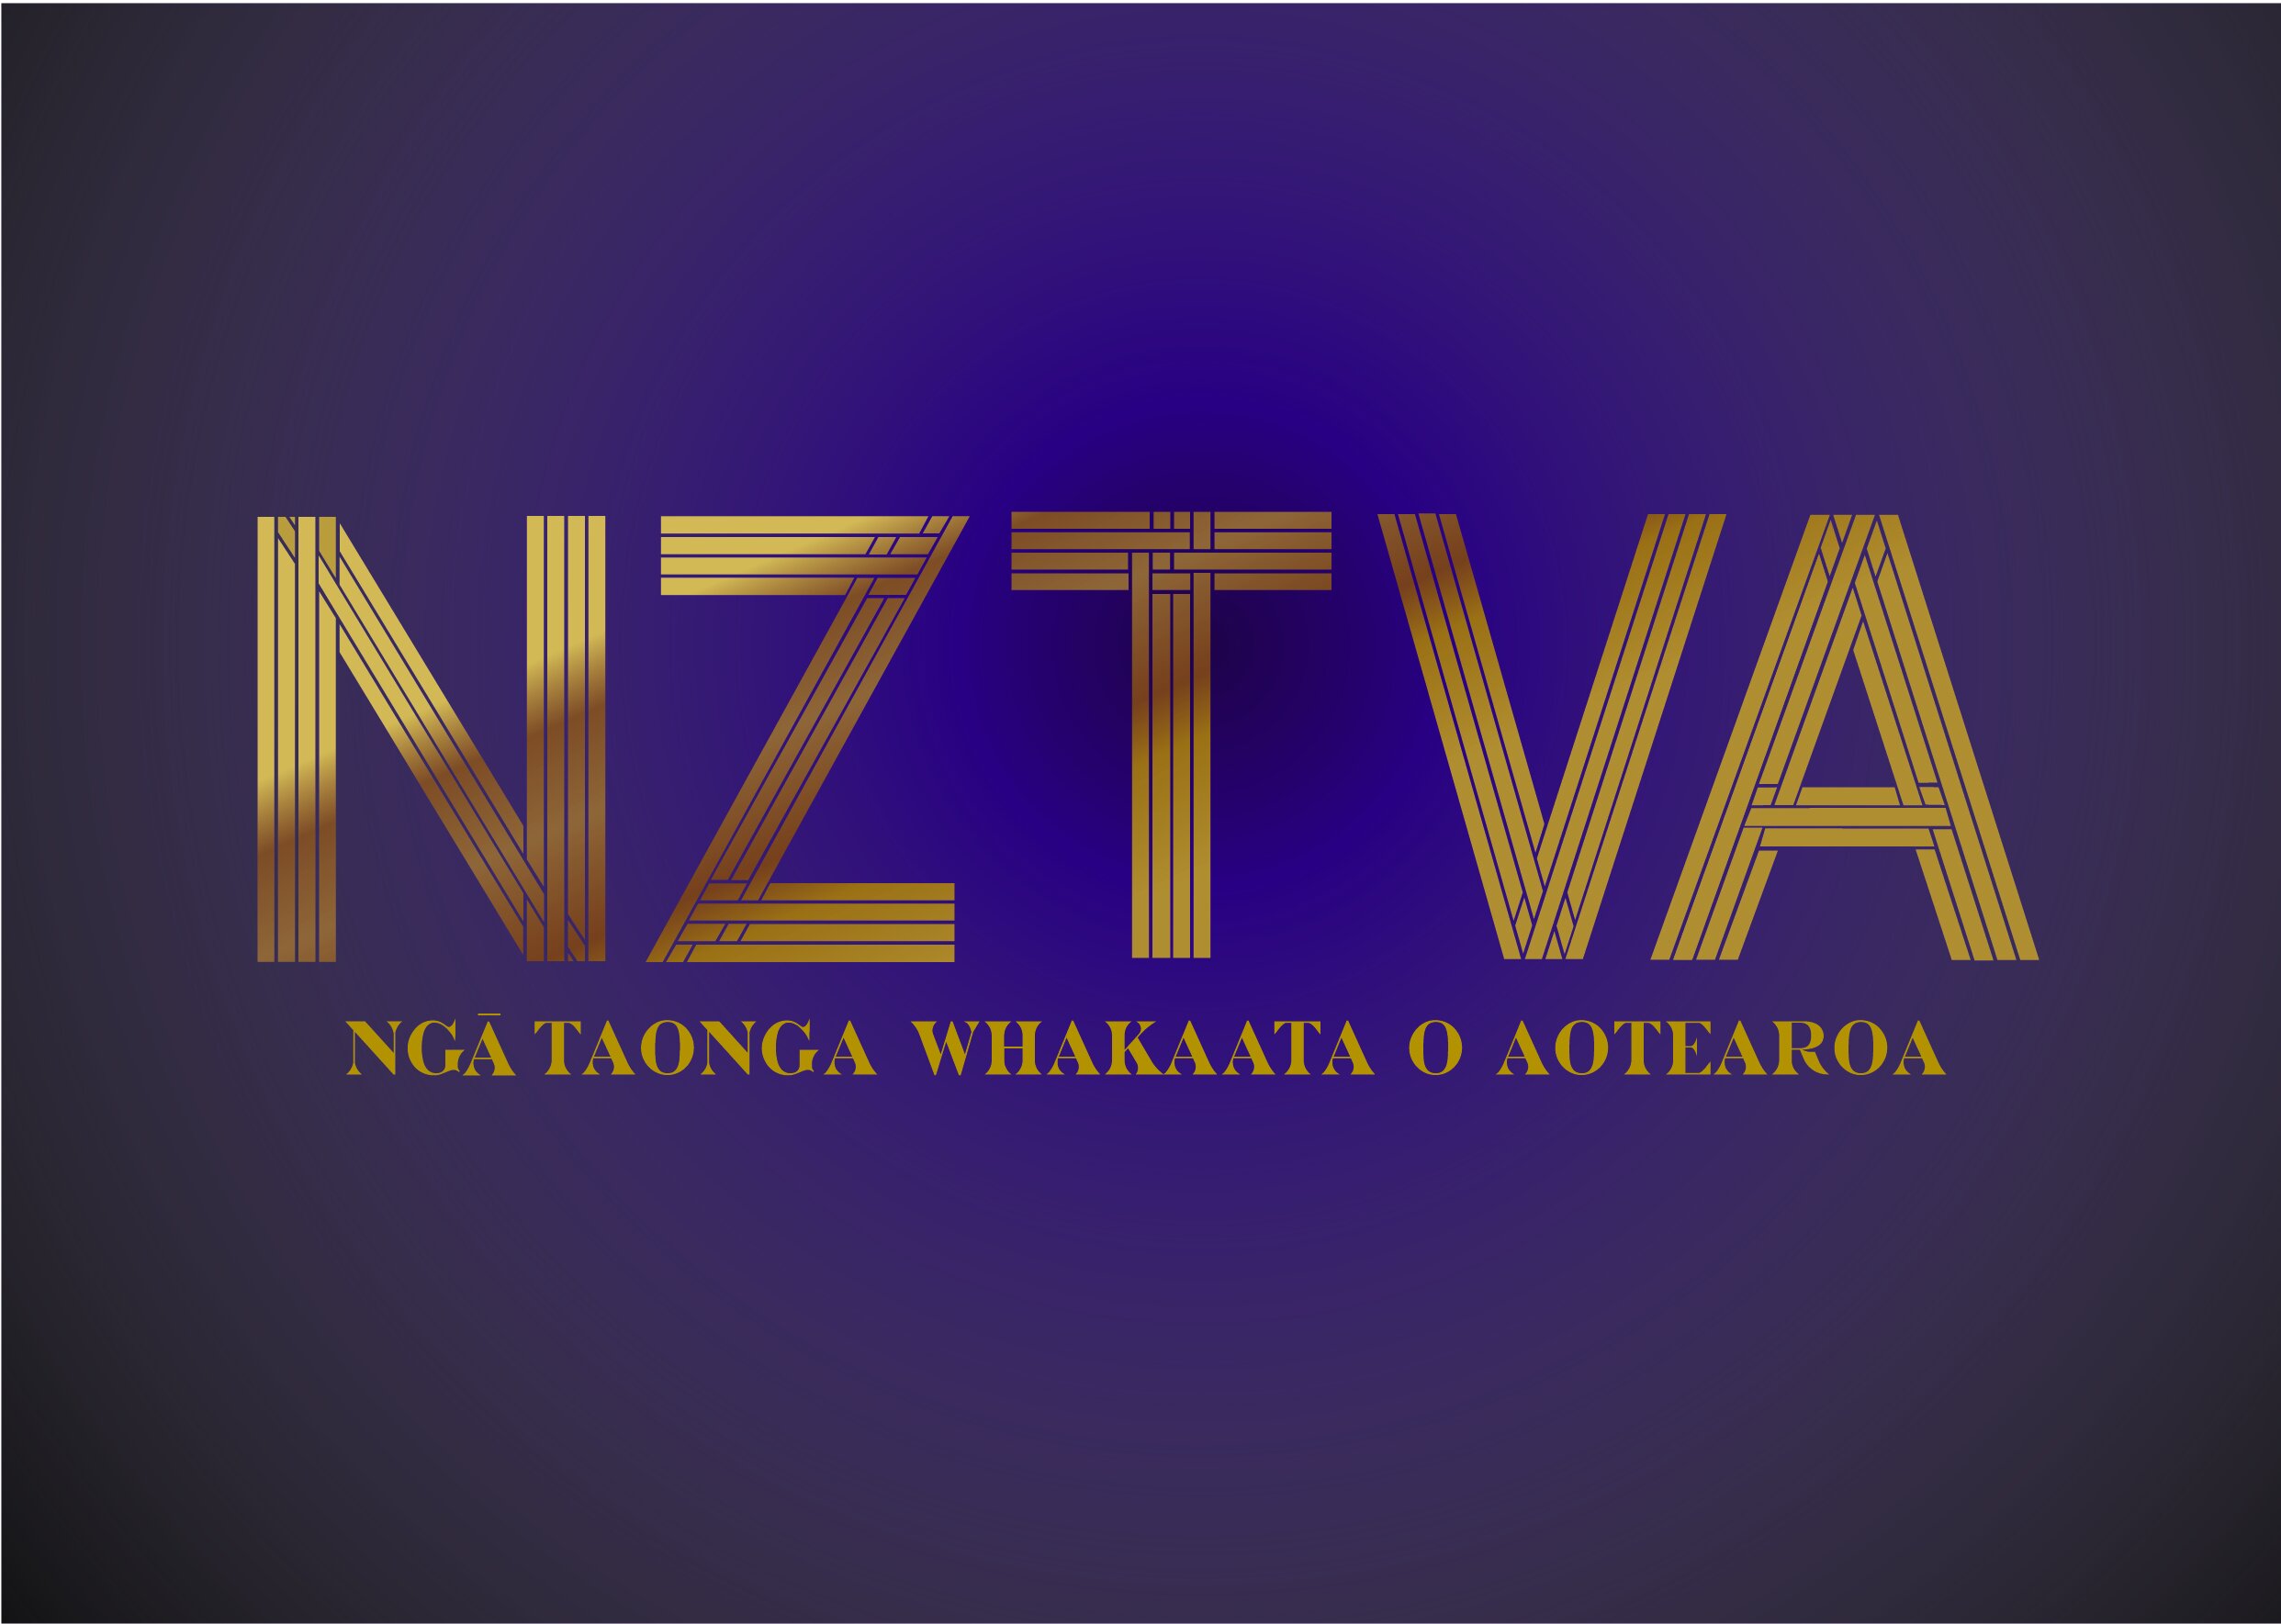 The New Zealand Television Awards // PR & Communications